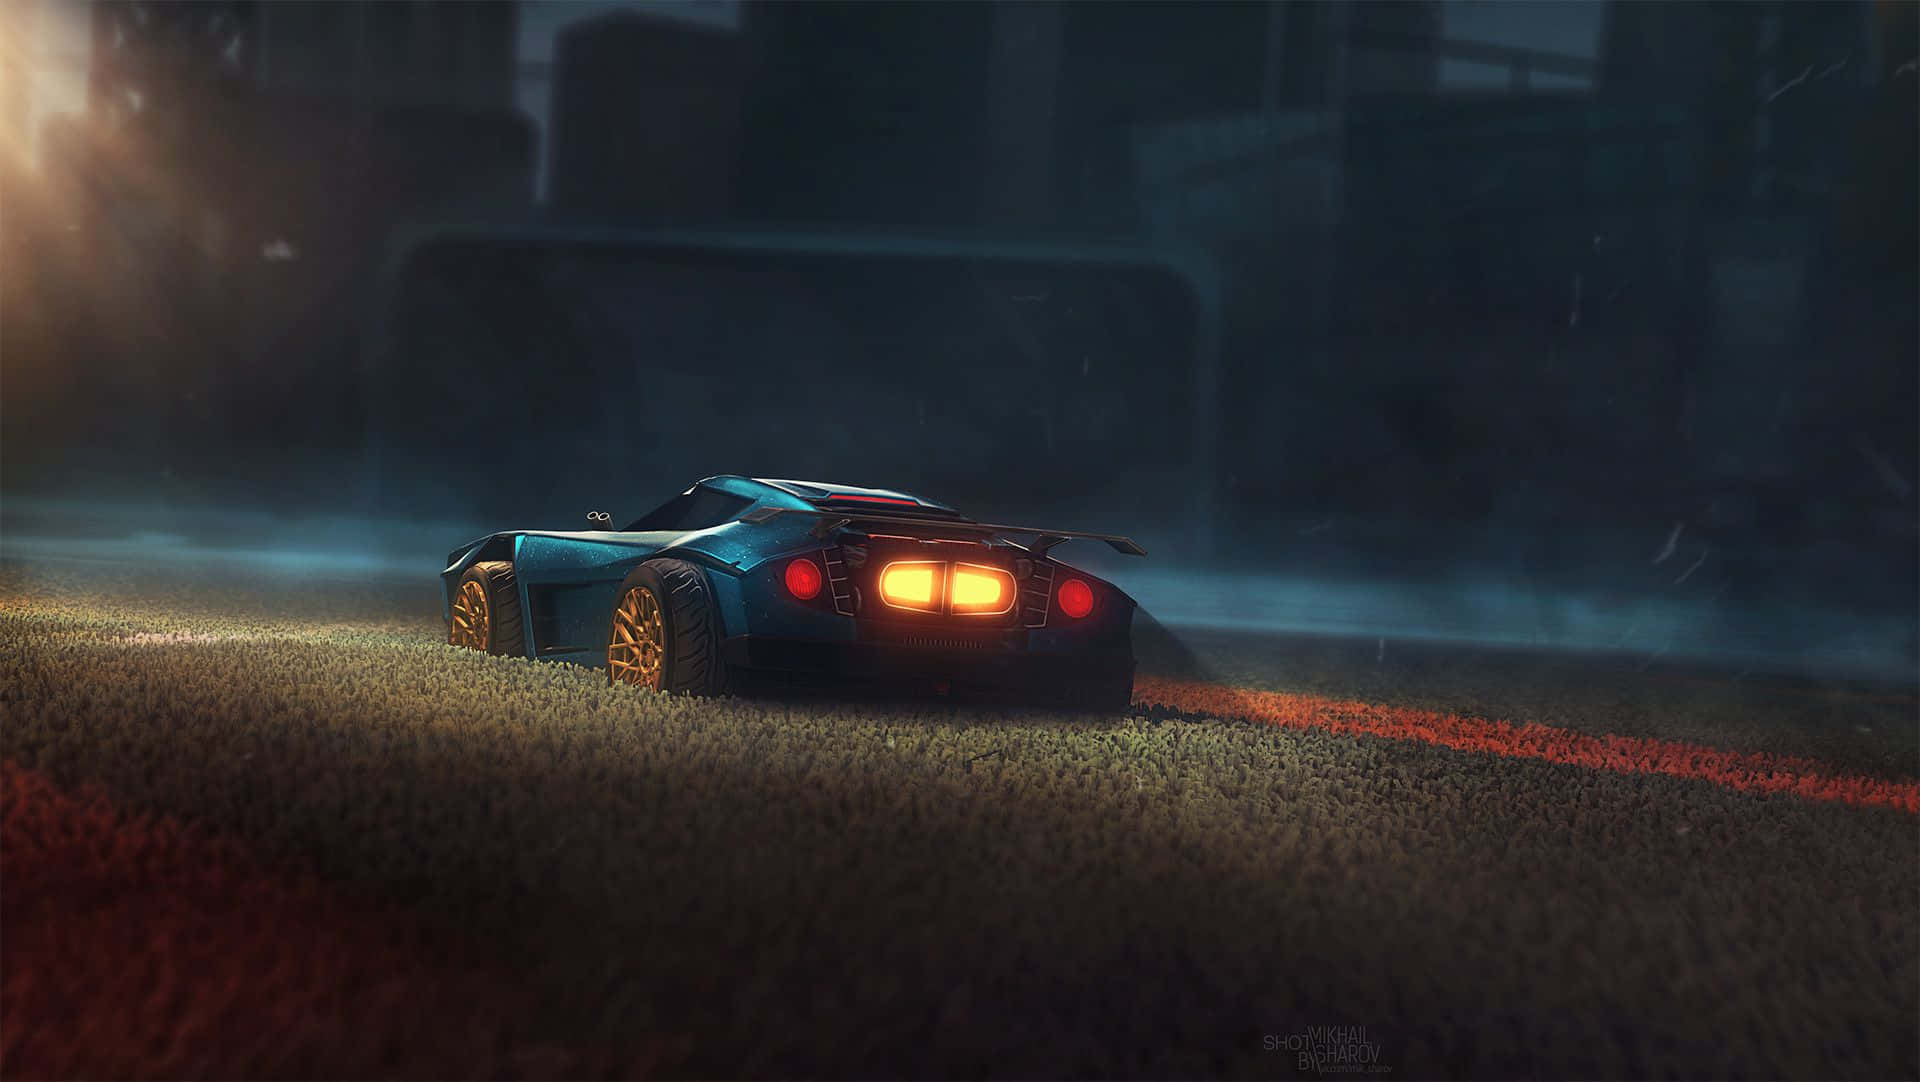 Image Ready For Launch: A Gamer Flies Through An Off-road Track In Rocket League Background